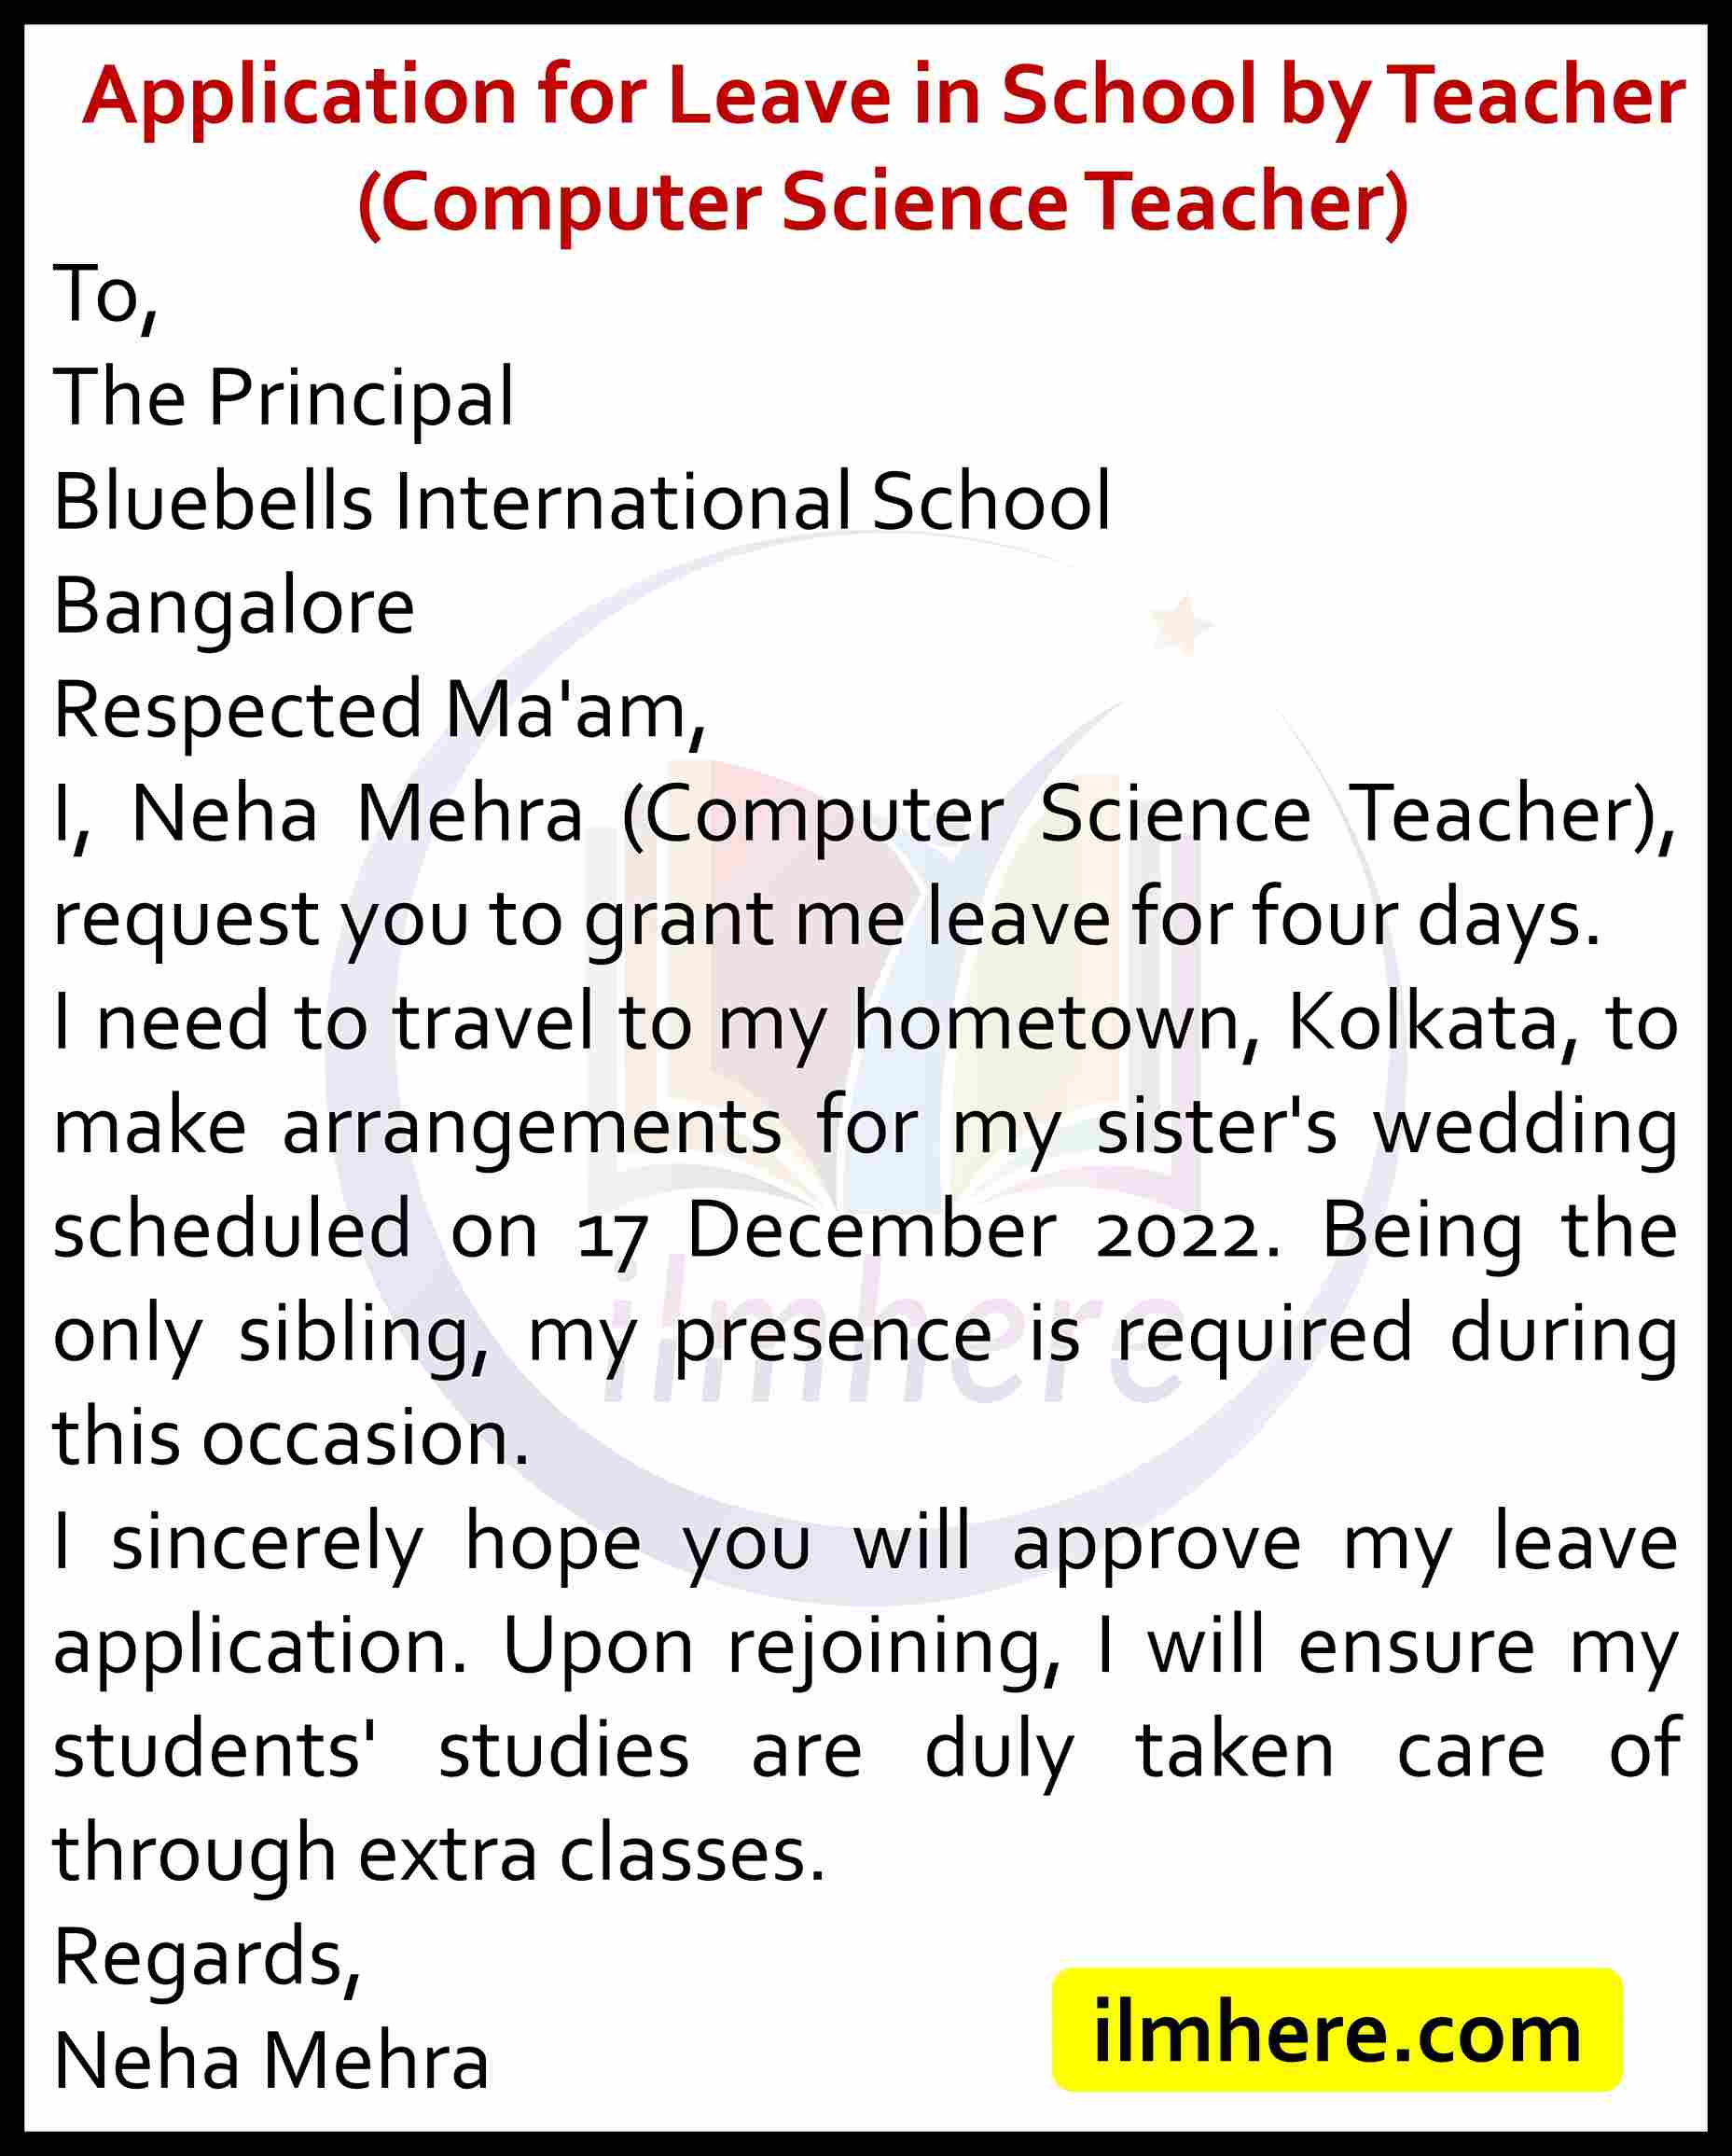 Application for Leave in School by Teacher (Computer Science Teacher)